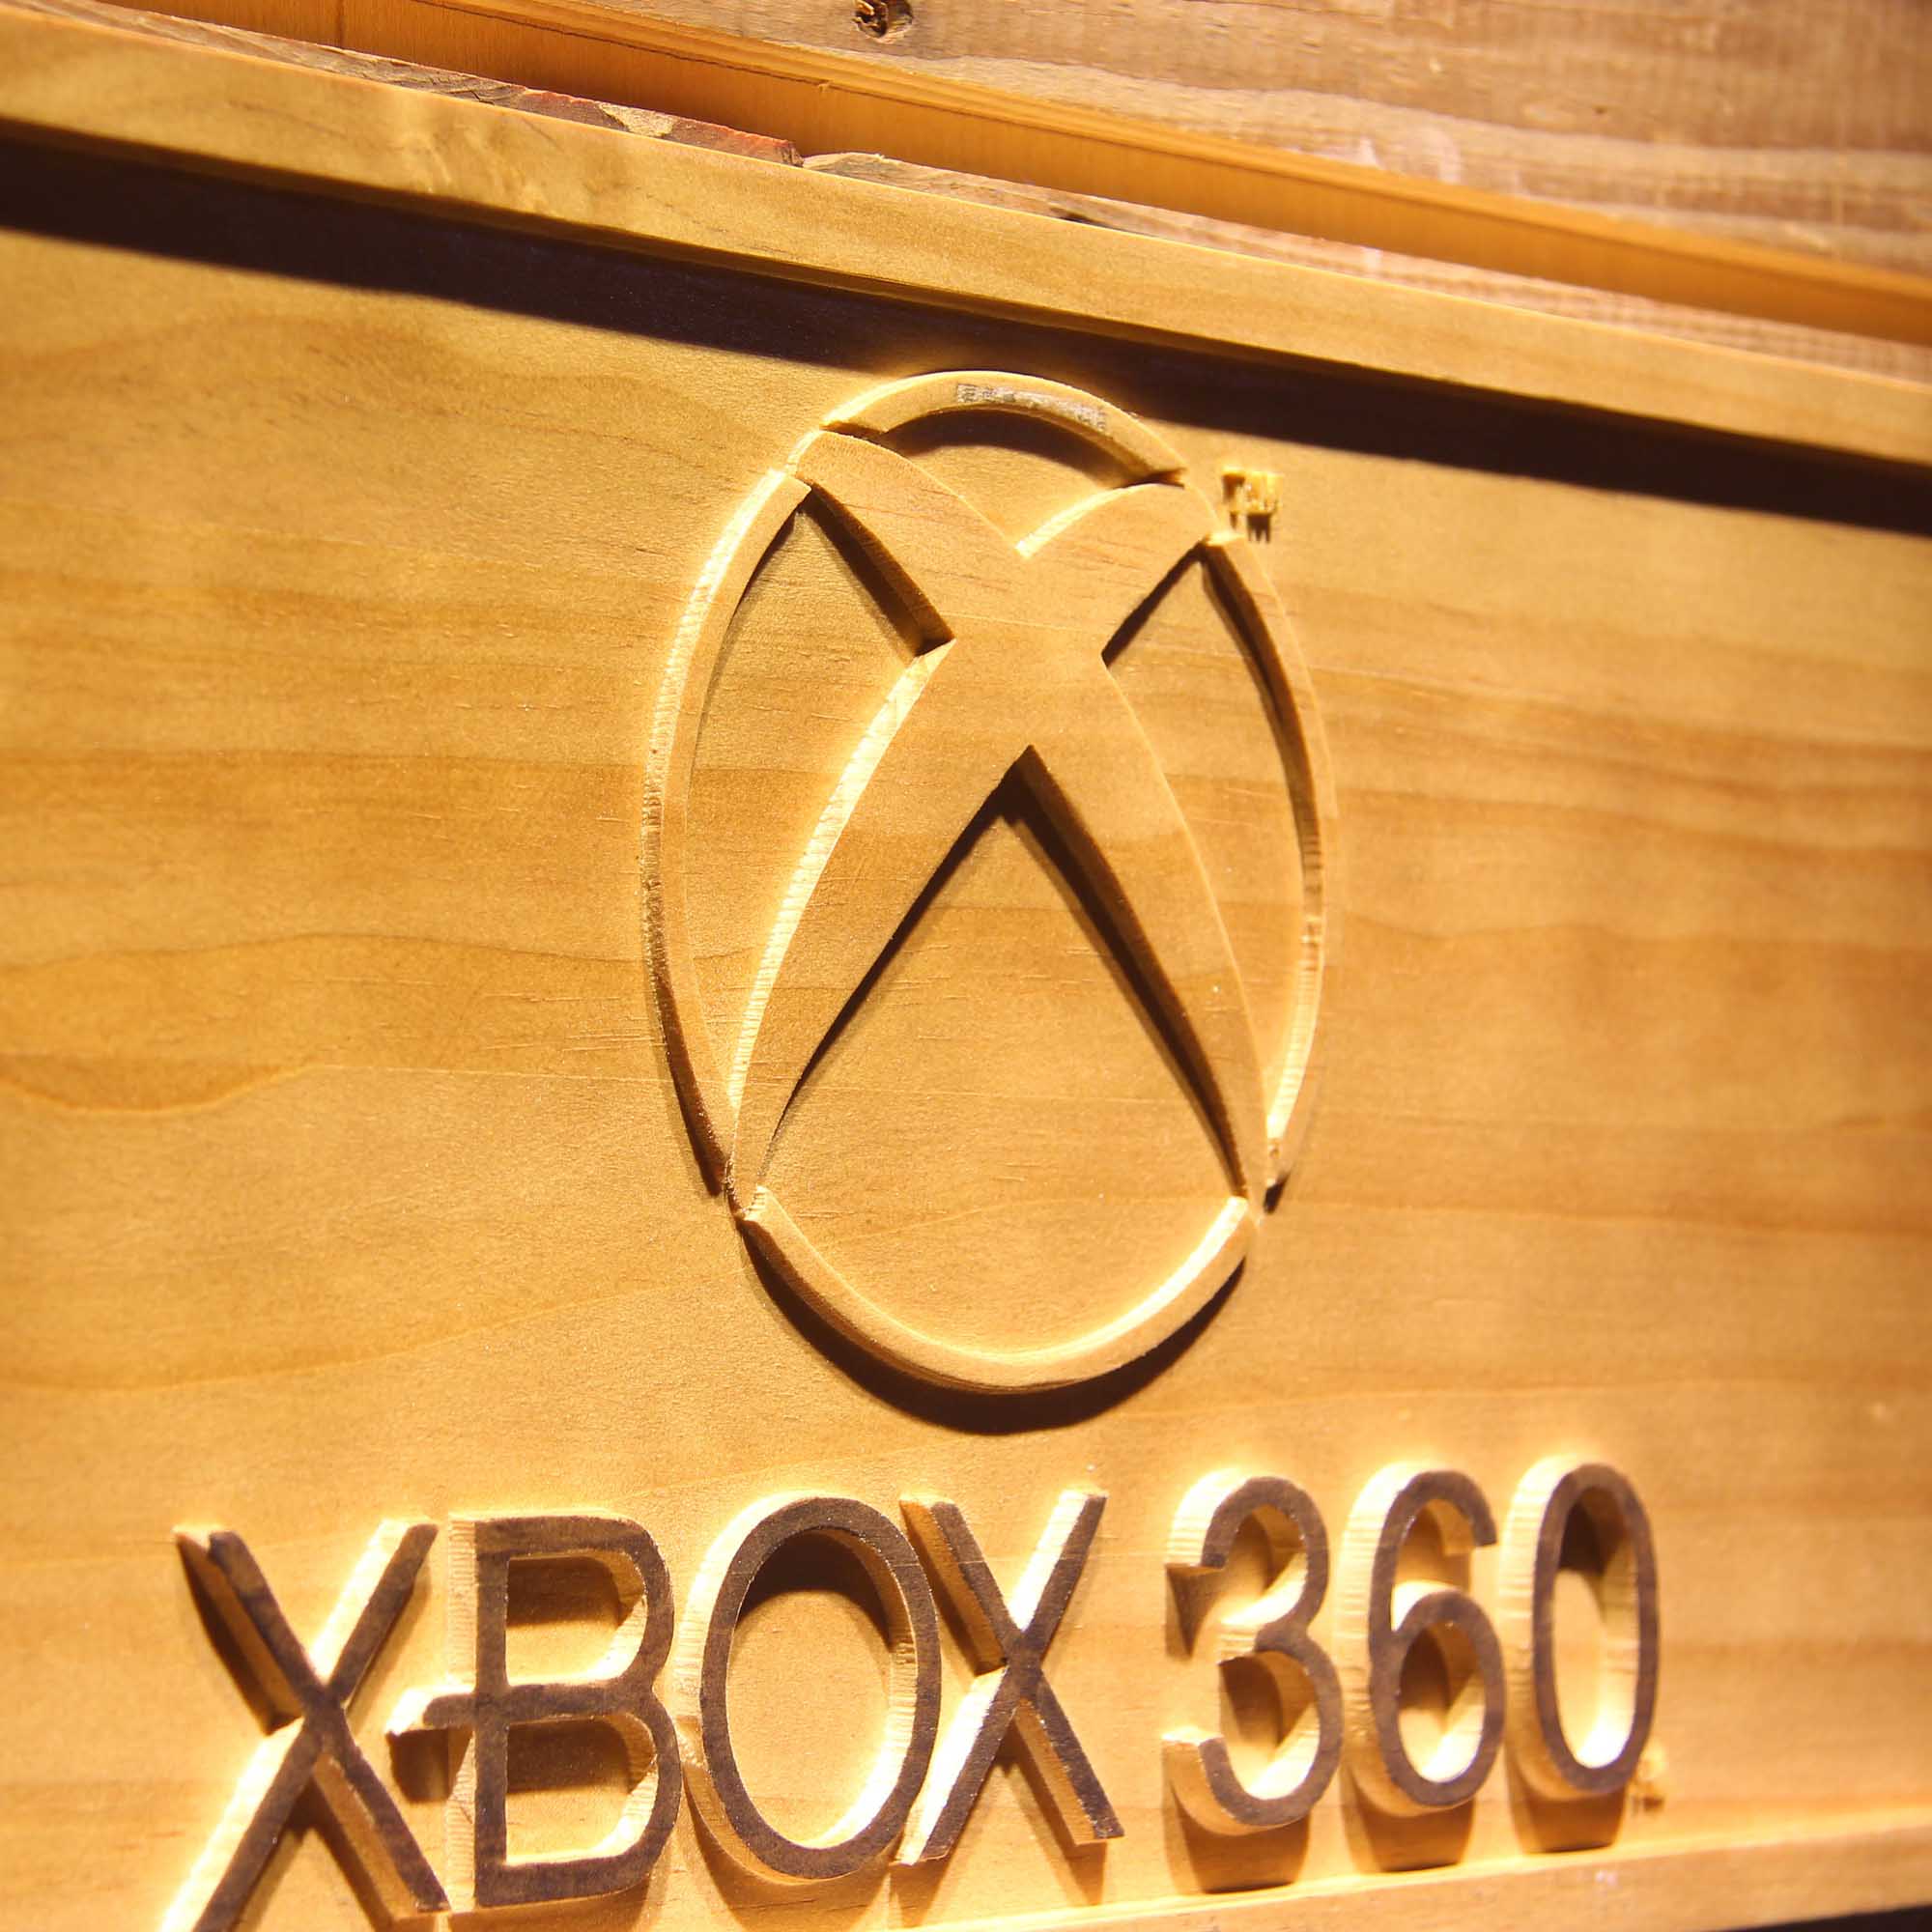 Xbox 360 Game Room 3D Wooden Engrave Sign